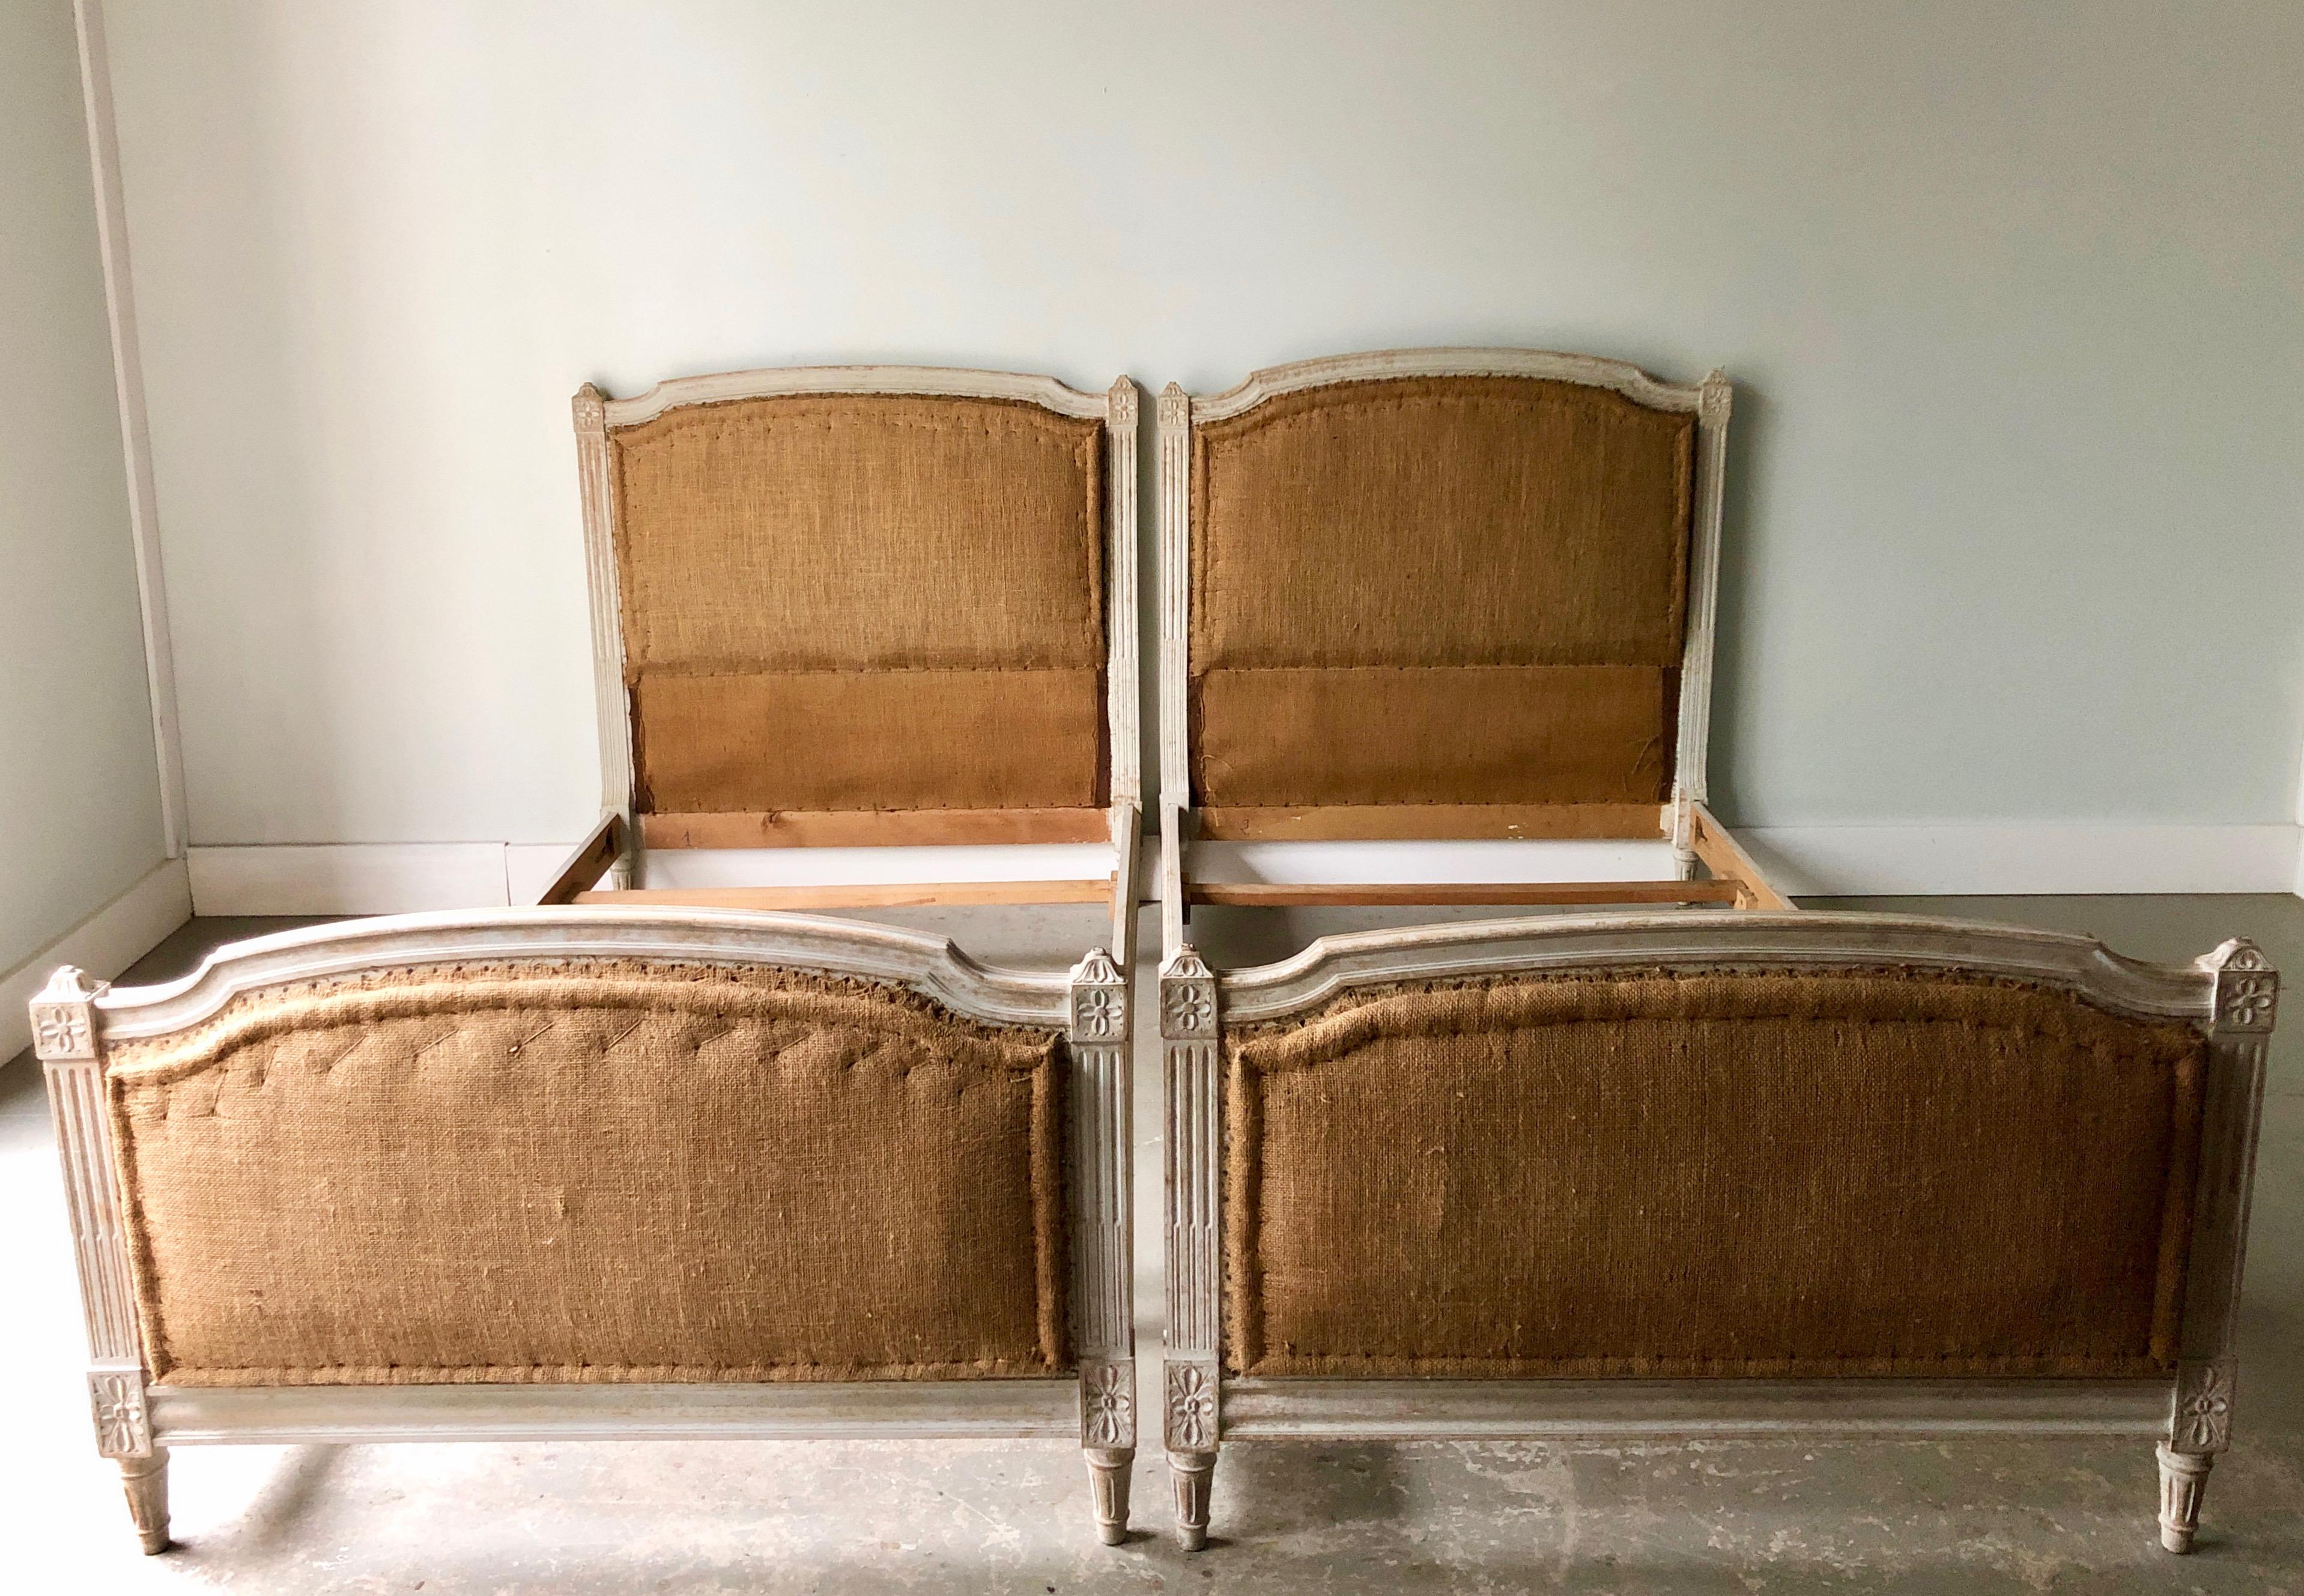 A pair of late 19th century French single beds with beautiful details, ready for your own selected upholstery.
Beds are in parts of:
2 headboards
2 footboards
4 rails
4 mattress supports
Inside measurements: W 76